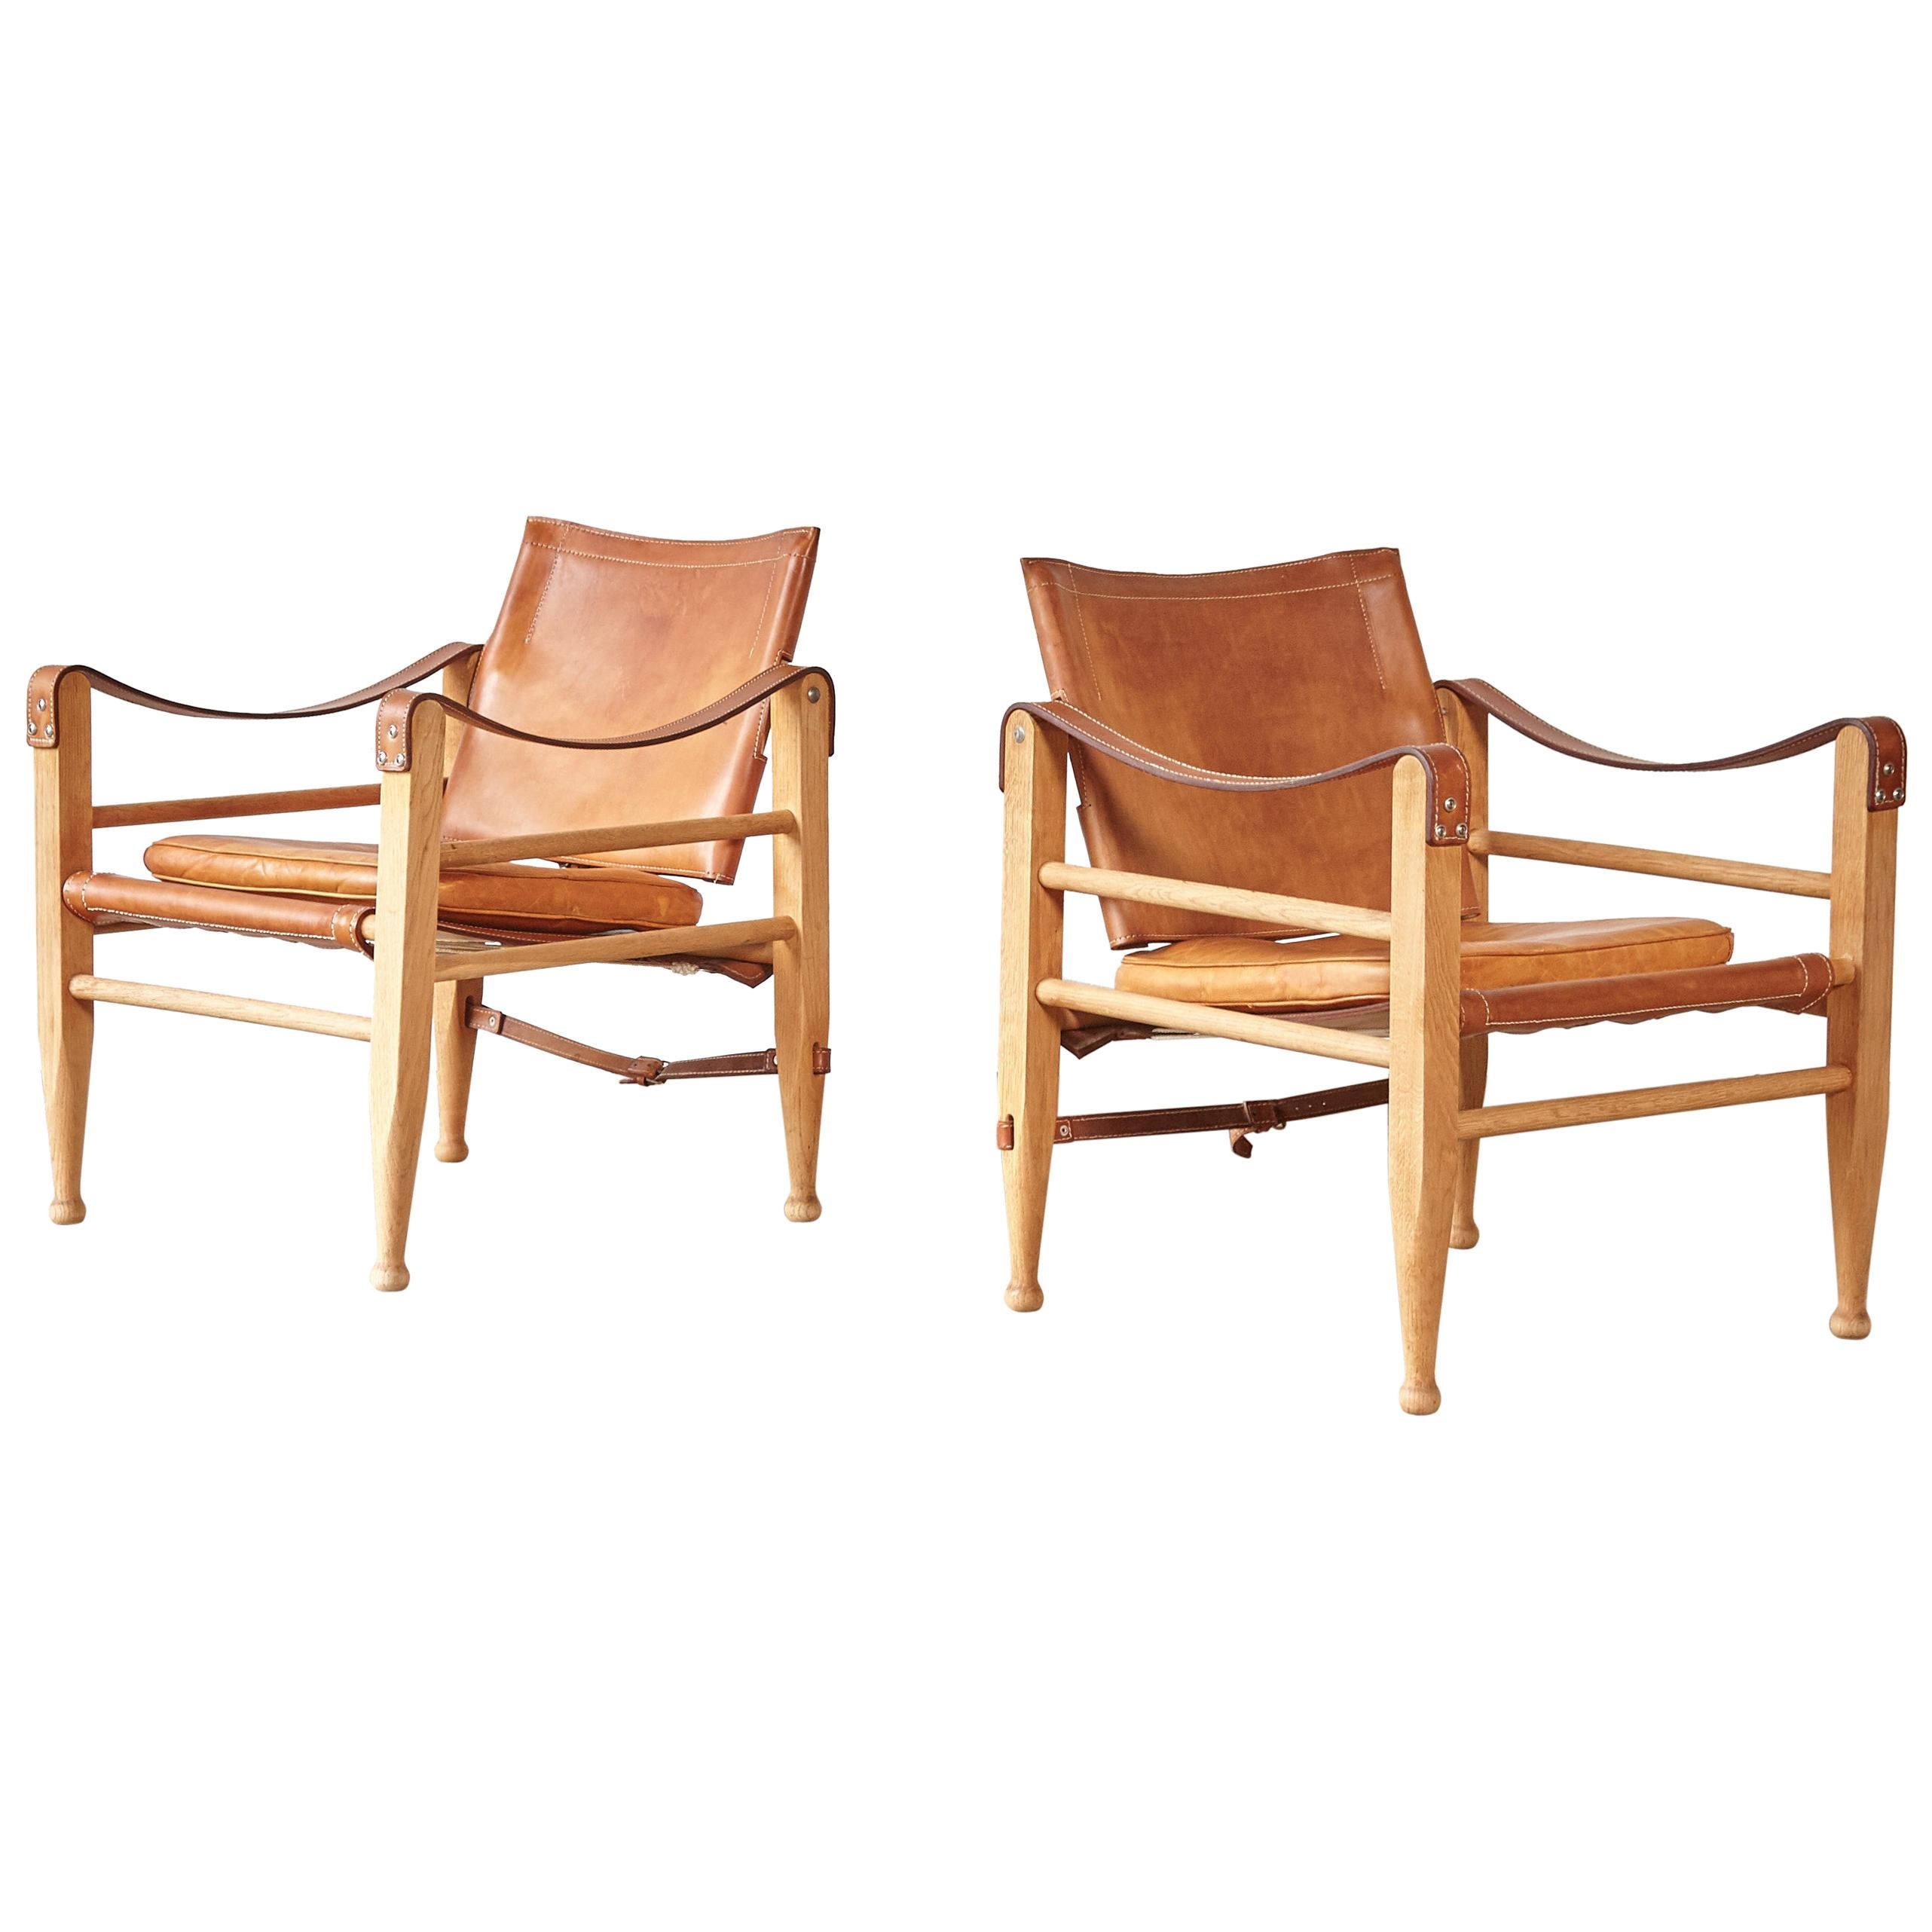 Aage Bruun and Son Safari Chairs in Patinated Tan Leather, Denmark, 1960s